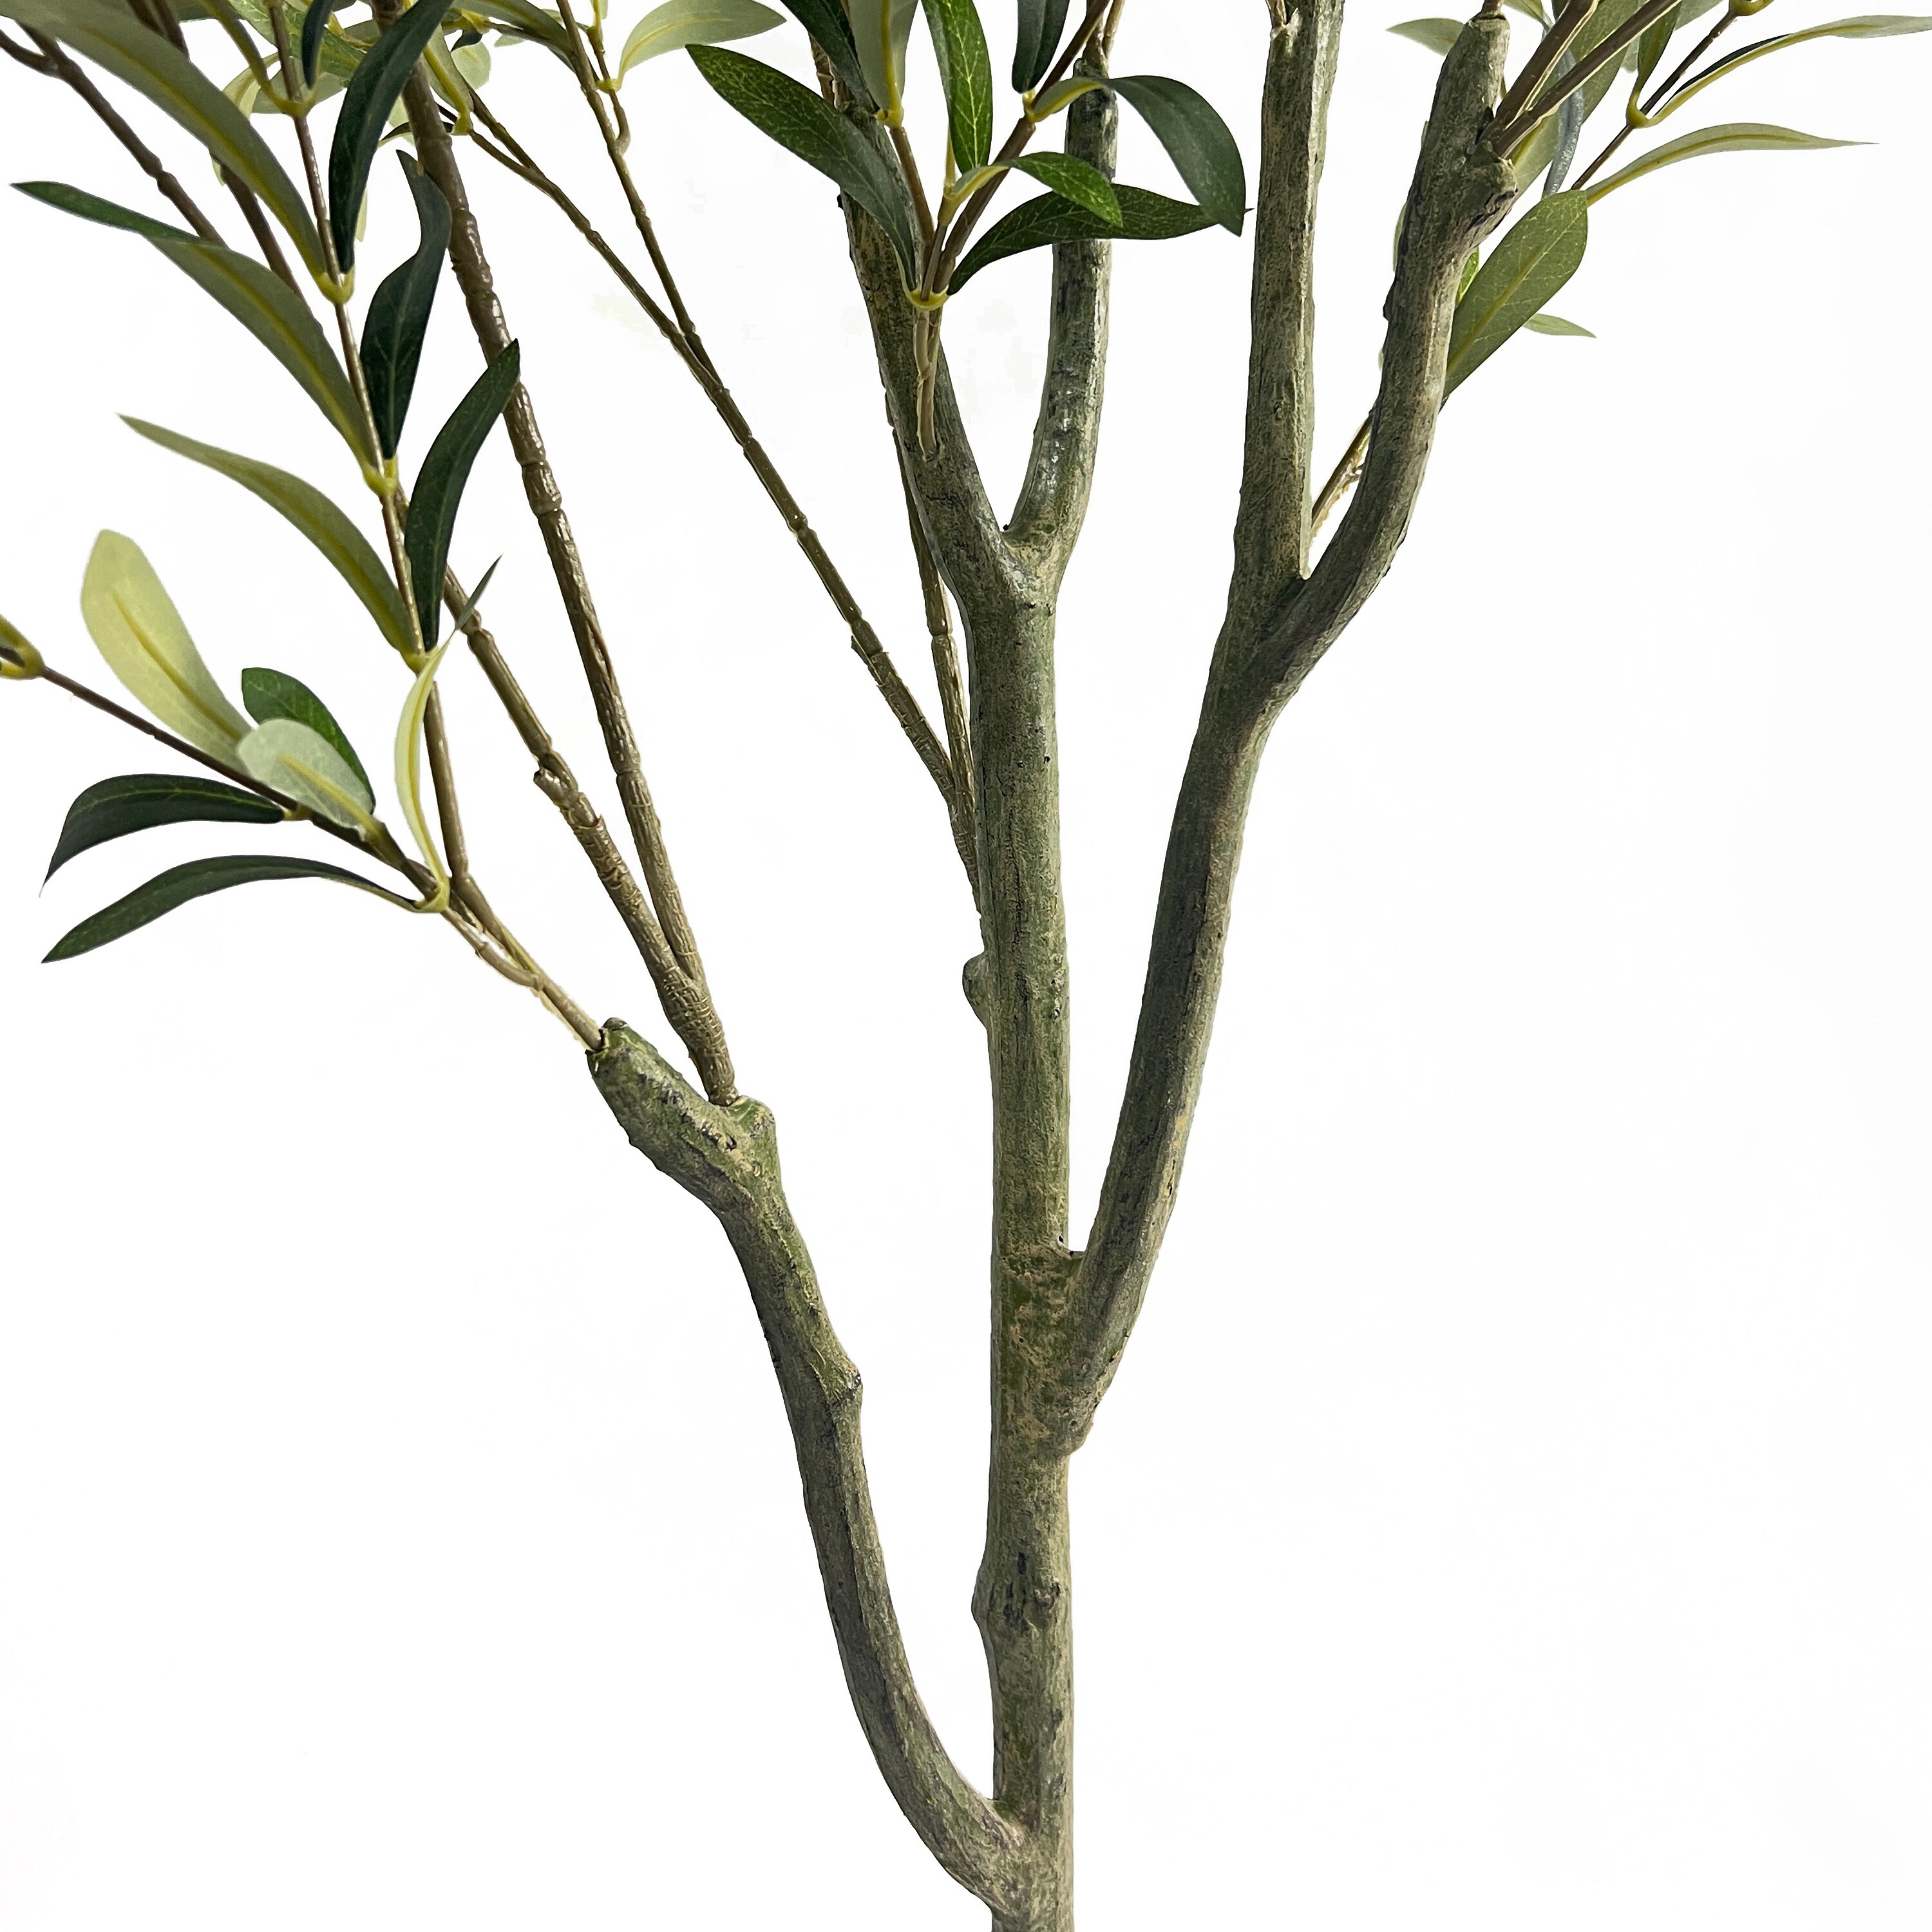 Taos 4' x 1.5' Artificial Olive Tree by Christopher Knight Home - On Sale -  Bed Bath & Beyond - 32115239